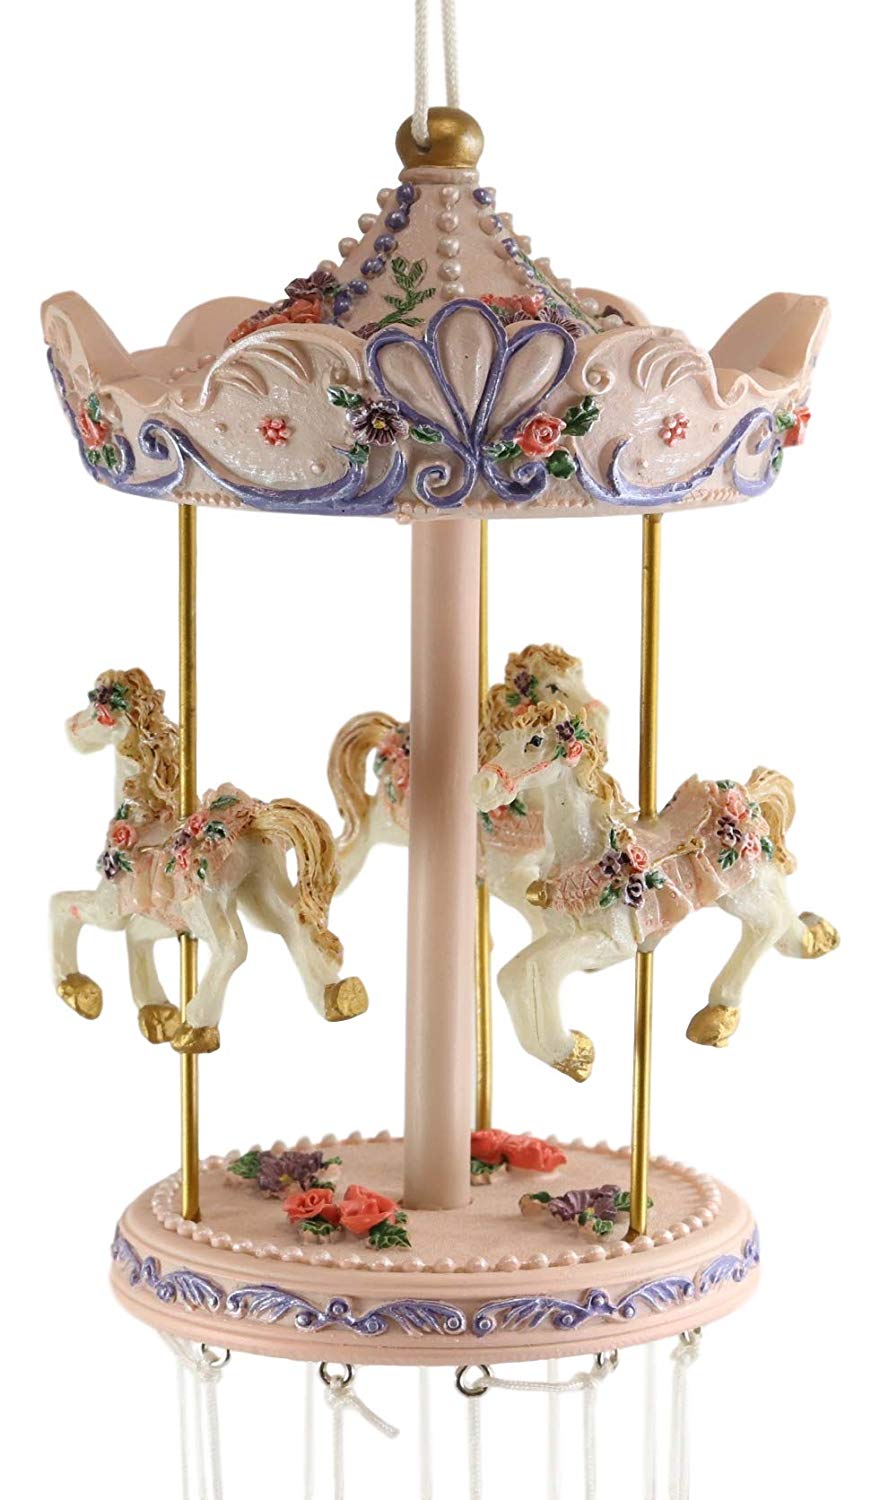 Ebros Gift Pink Carnival Canopy Pony Horses Carousel Figurine Crown Top Resonant Wind Chime With Miniature Ponies Ornaments...